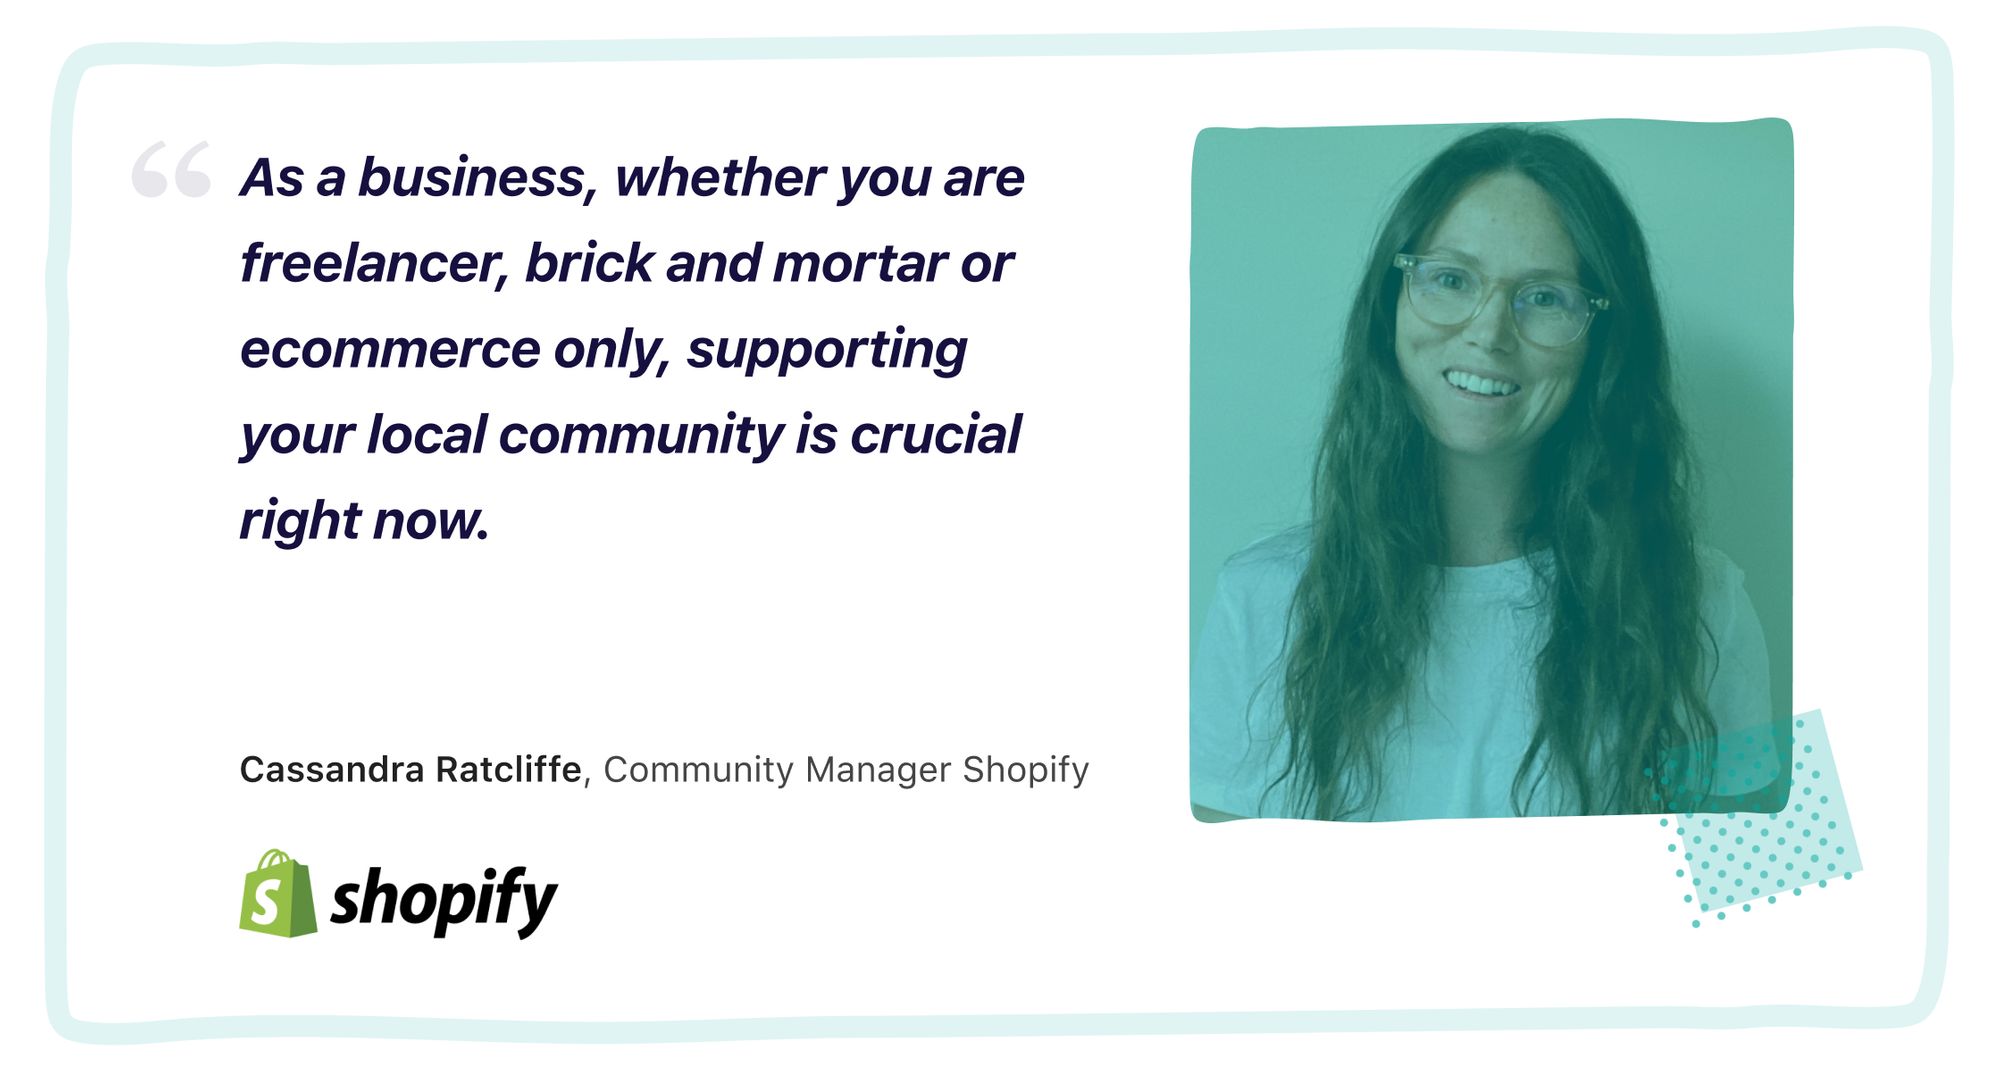 Cassandra-Ratcliffe-Community-Manager-Shopify-Expert-Quote